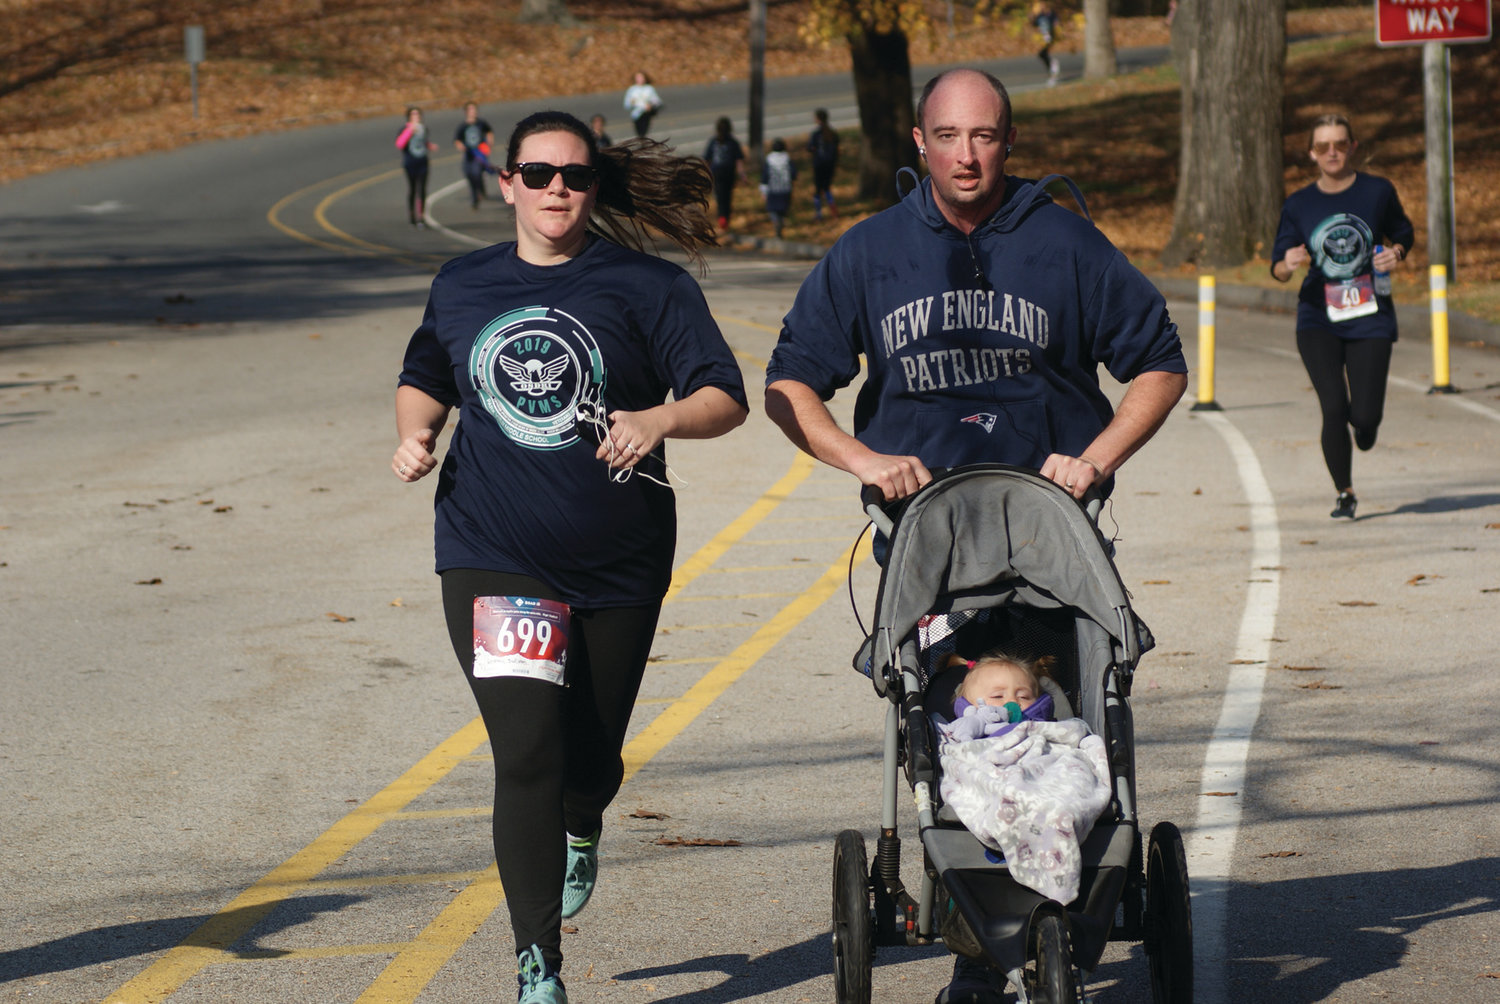 TAKING IT IN STRIDE: Matt and Lindsay Ryan of Warwick kept pace as they were joined by their daughter, 10-month-old Lillian. The family finished the course in just less than 40 minutes.